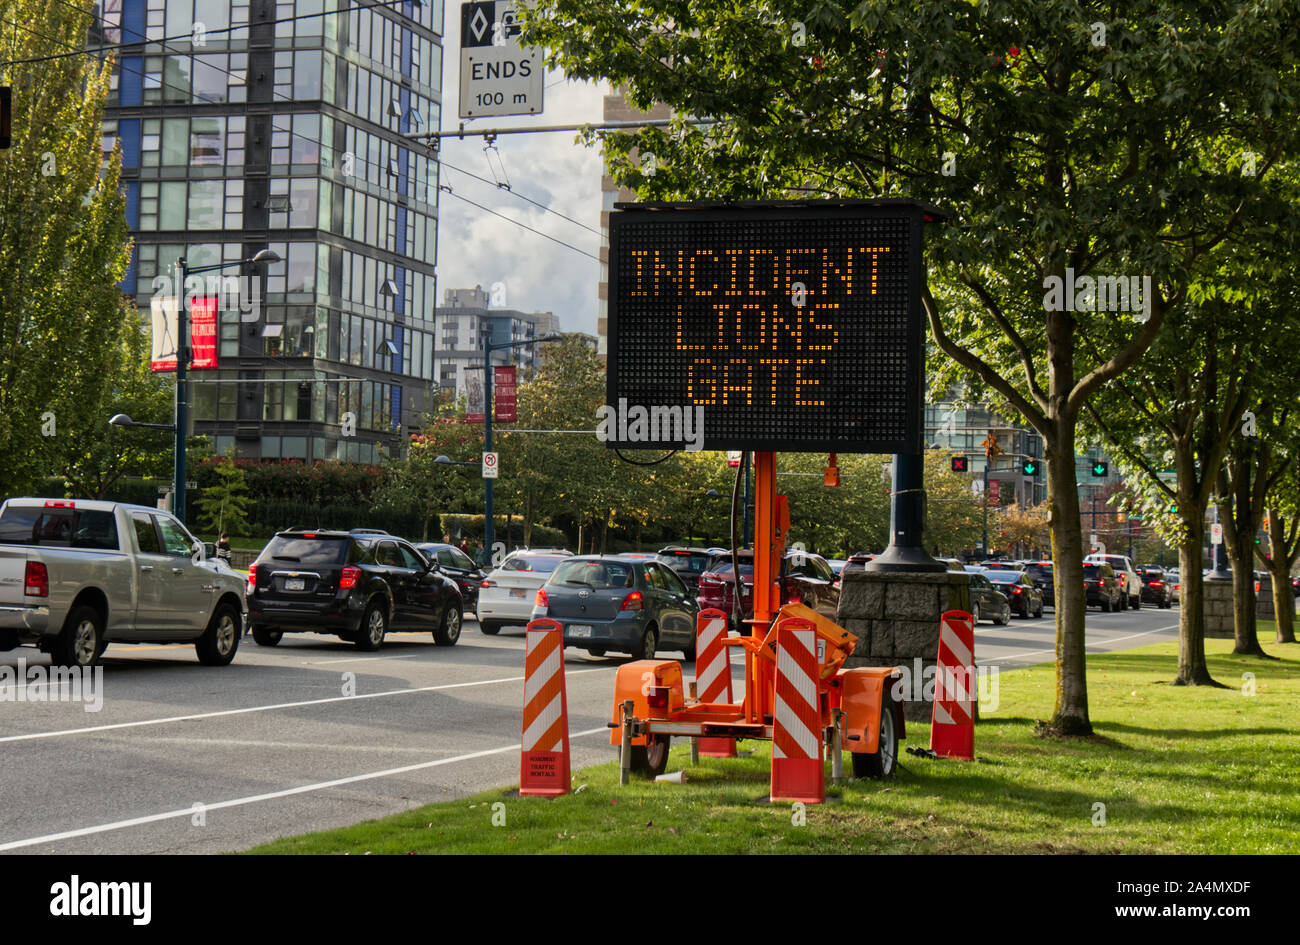 Vancouver, Canada - September 15, 2019: Incident Lions Gate Bridge sign, major traffic jam on West Georgia Street because of incident Stock Photo